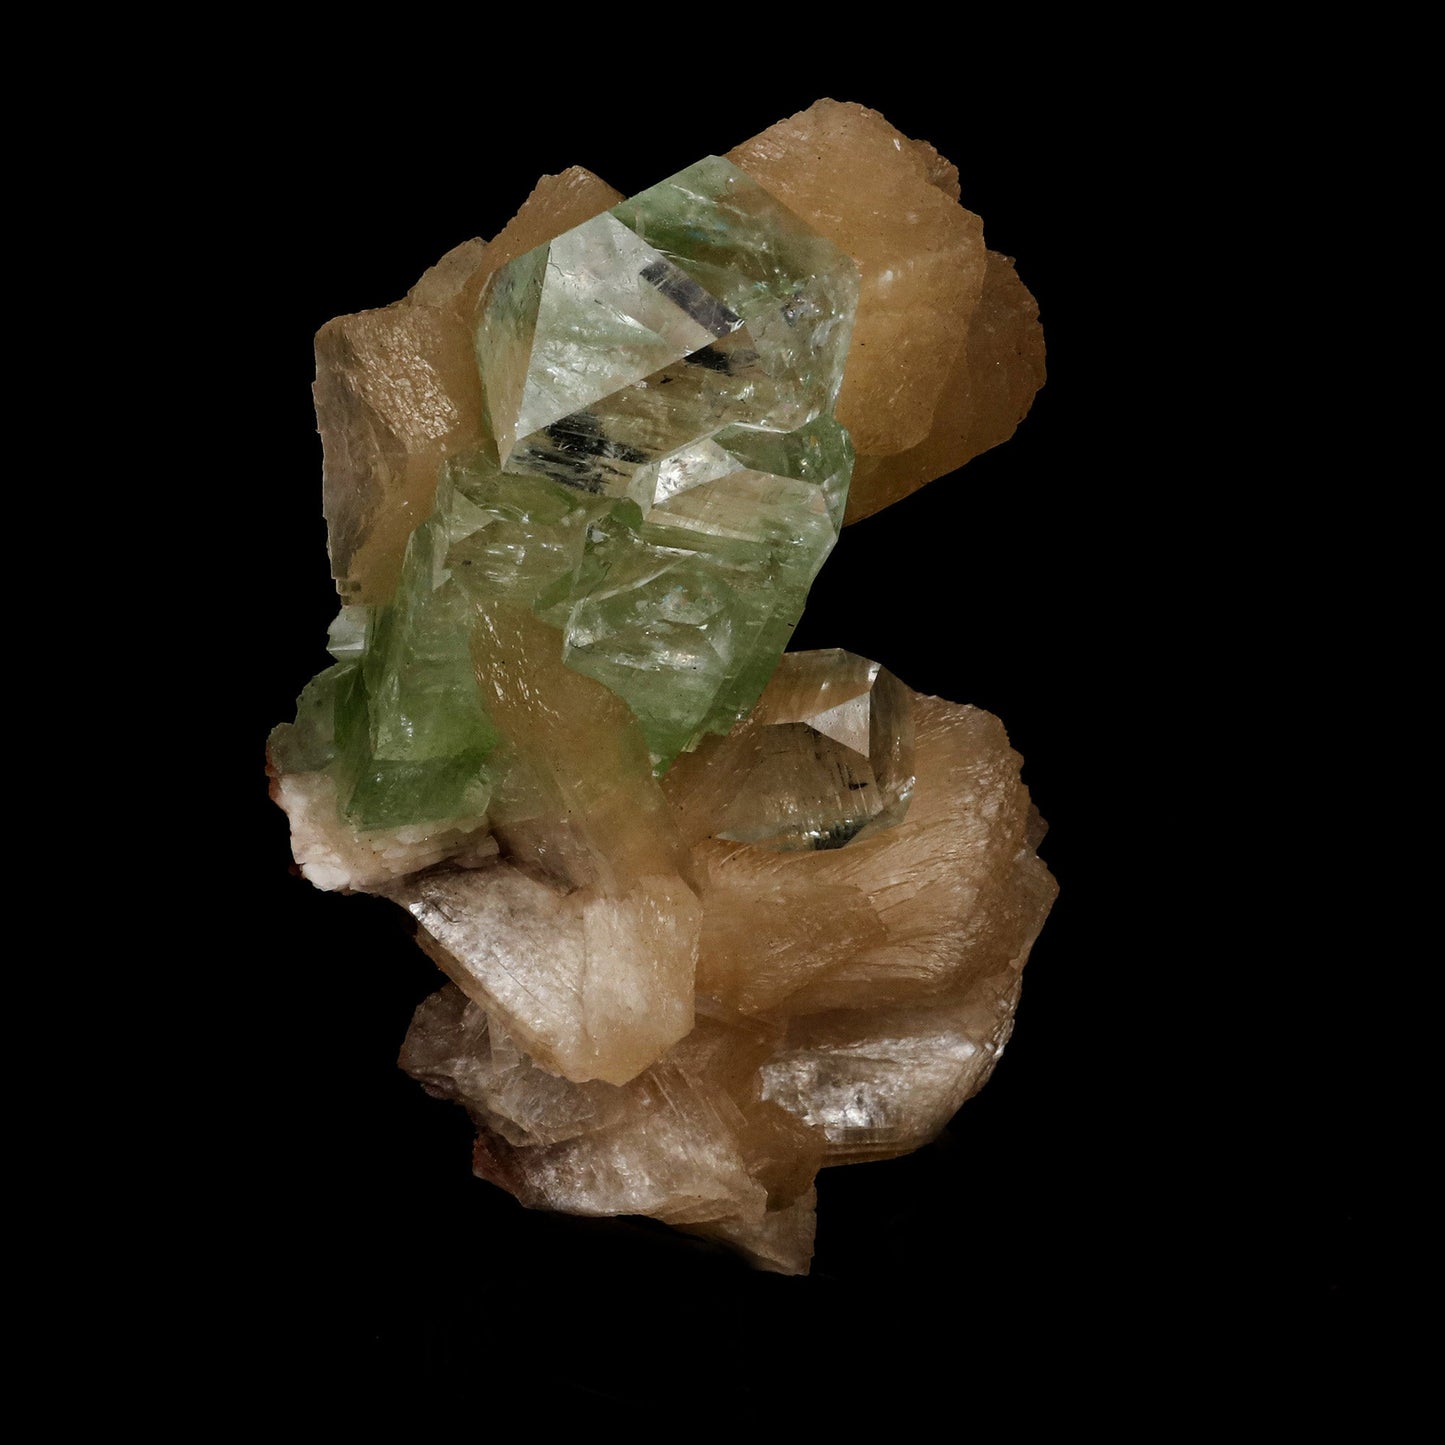 Green Apophyllite Pesudo Crystals with Stilbite Natural Mineral Specim…  https://www.superbminerals.us/products/copy-of-green-apophyllite-pesudo-crystals-with-stilbite-natural-mineral-specimen-b-5238  Features: In this large mounded combination from Nashik's recent discoveries, a stunning color-zoned apophyllite crystal is surrounded by smaller crystals of the same type. Tetragonal apophyllites have glassy, translucent centers and colourless terminations, which are offset by the modified corners 